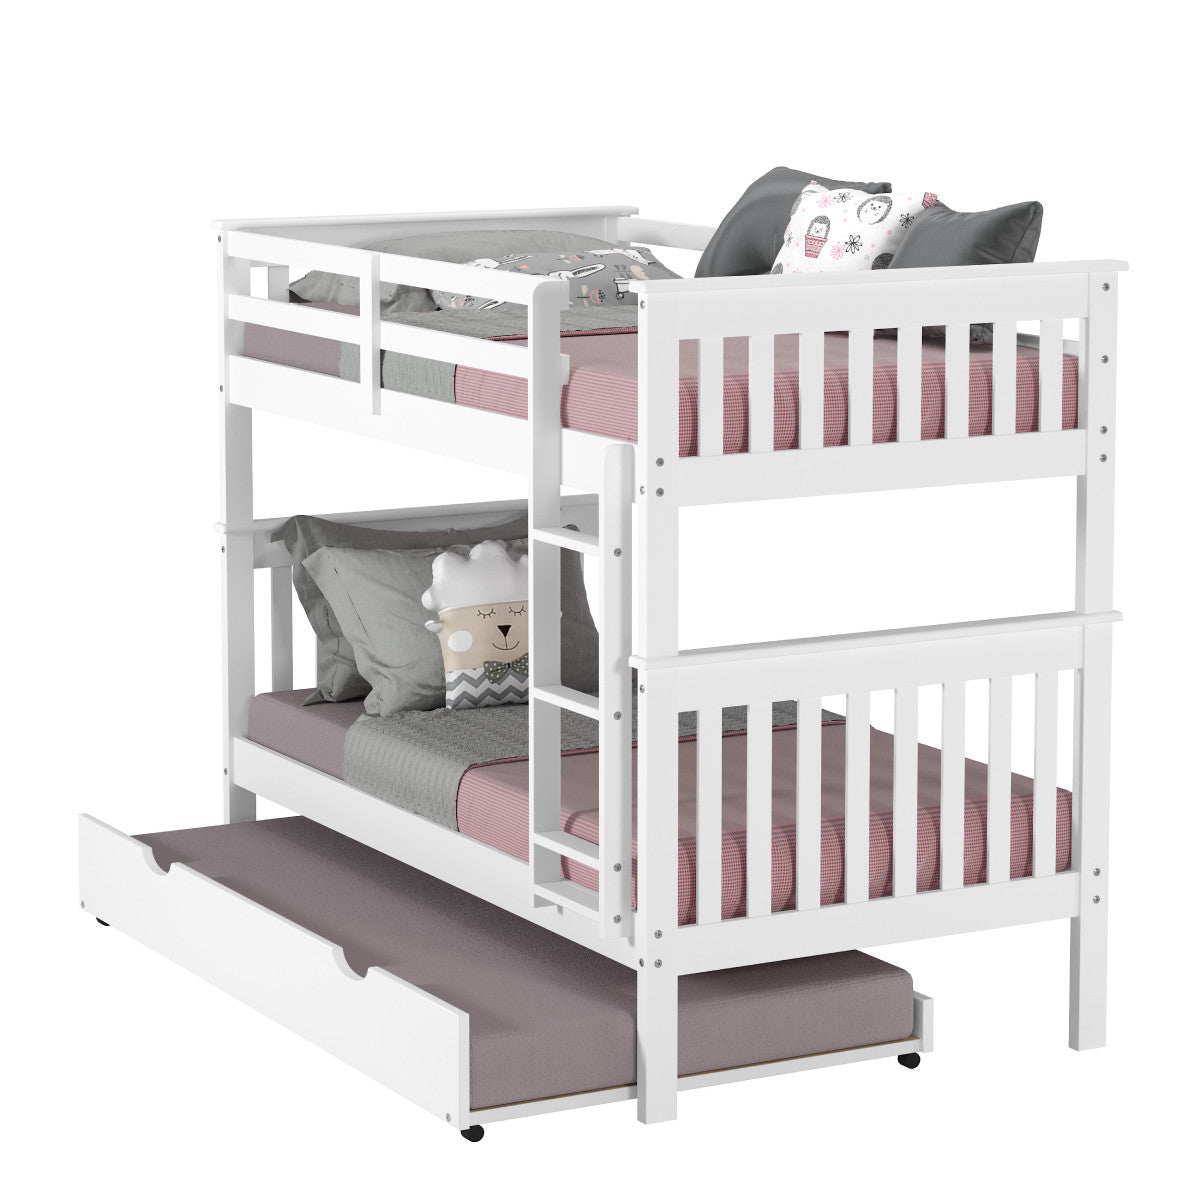 TWIN/TWIN MISSION BUNK BED WITH TRUNDLE BED IN WHITE FINISH